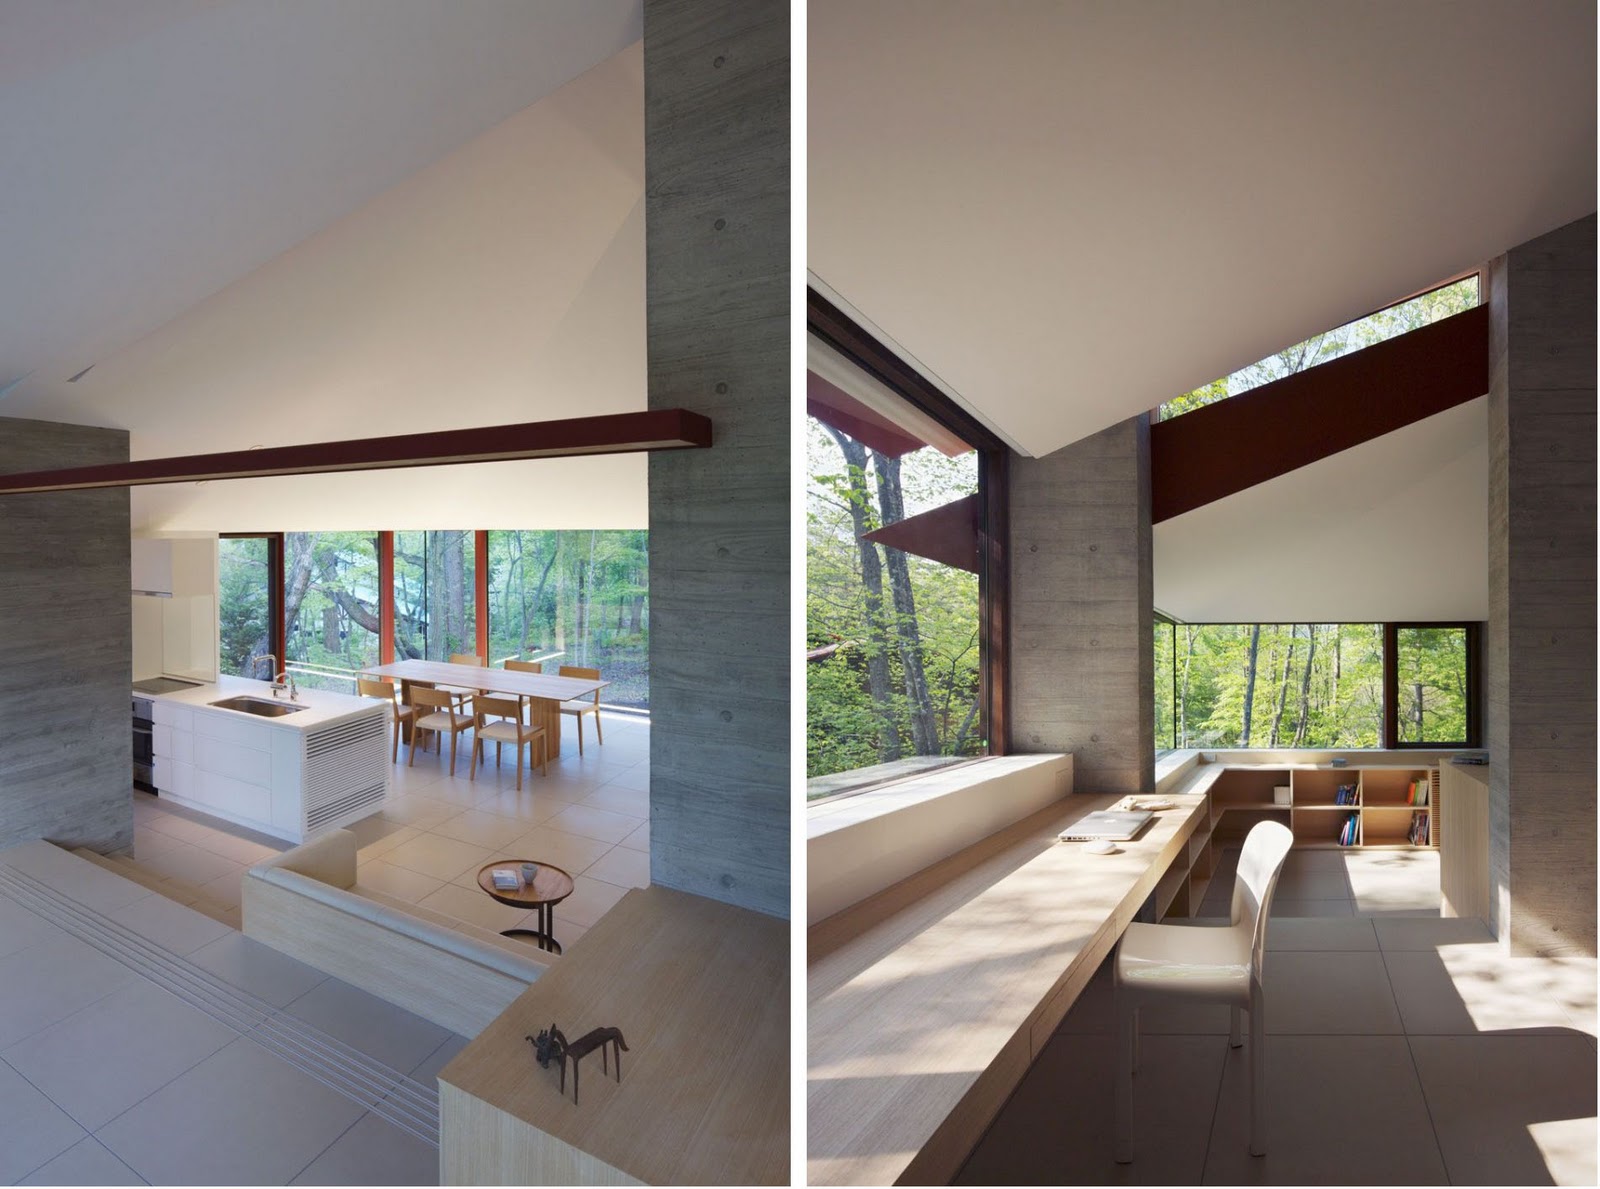 Japanese Residence [architectural digest] | Art & Architecture